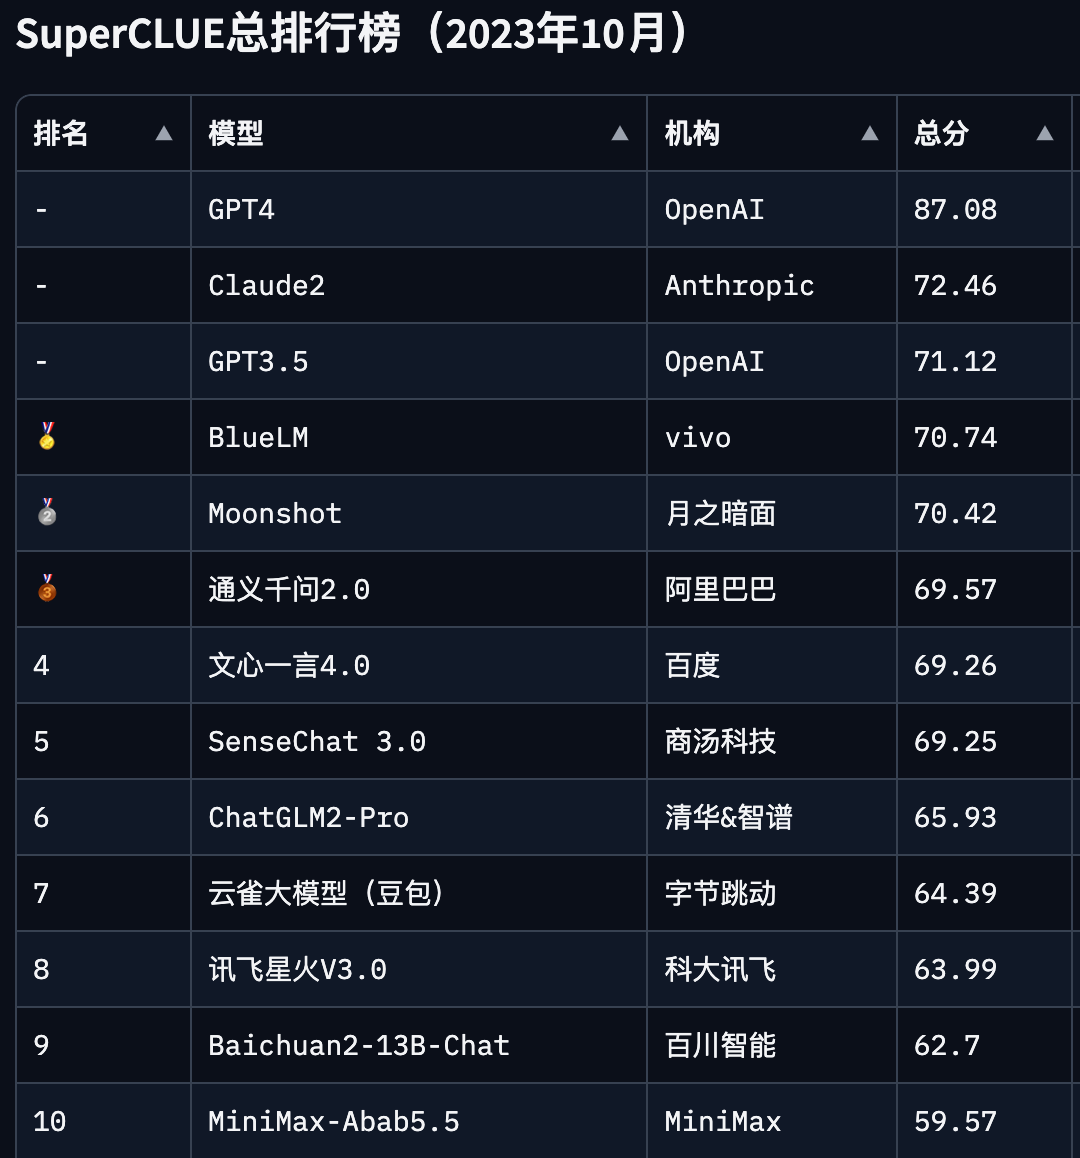 A ranked list of LLMs. GPT4 is in first with 87.08 points. Claude2 is in second with 72.46, GPT3.5 in third with 71.12, then the top 3 Chinese models are BlueLM with 70.74, Moonshot with 70.42, and tong yi qian wen 2.0 with 69.57.